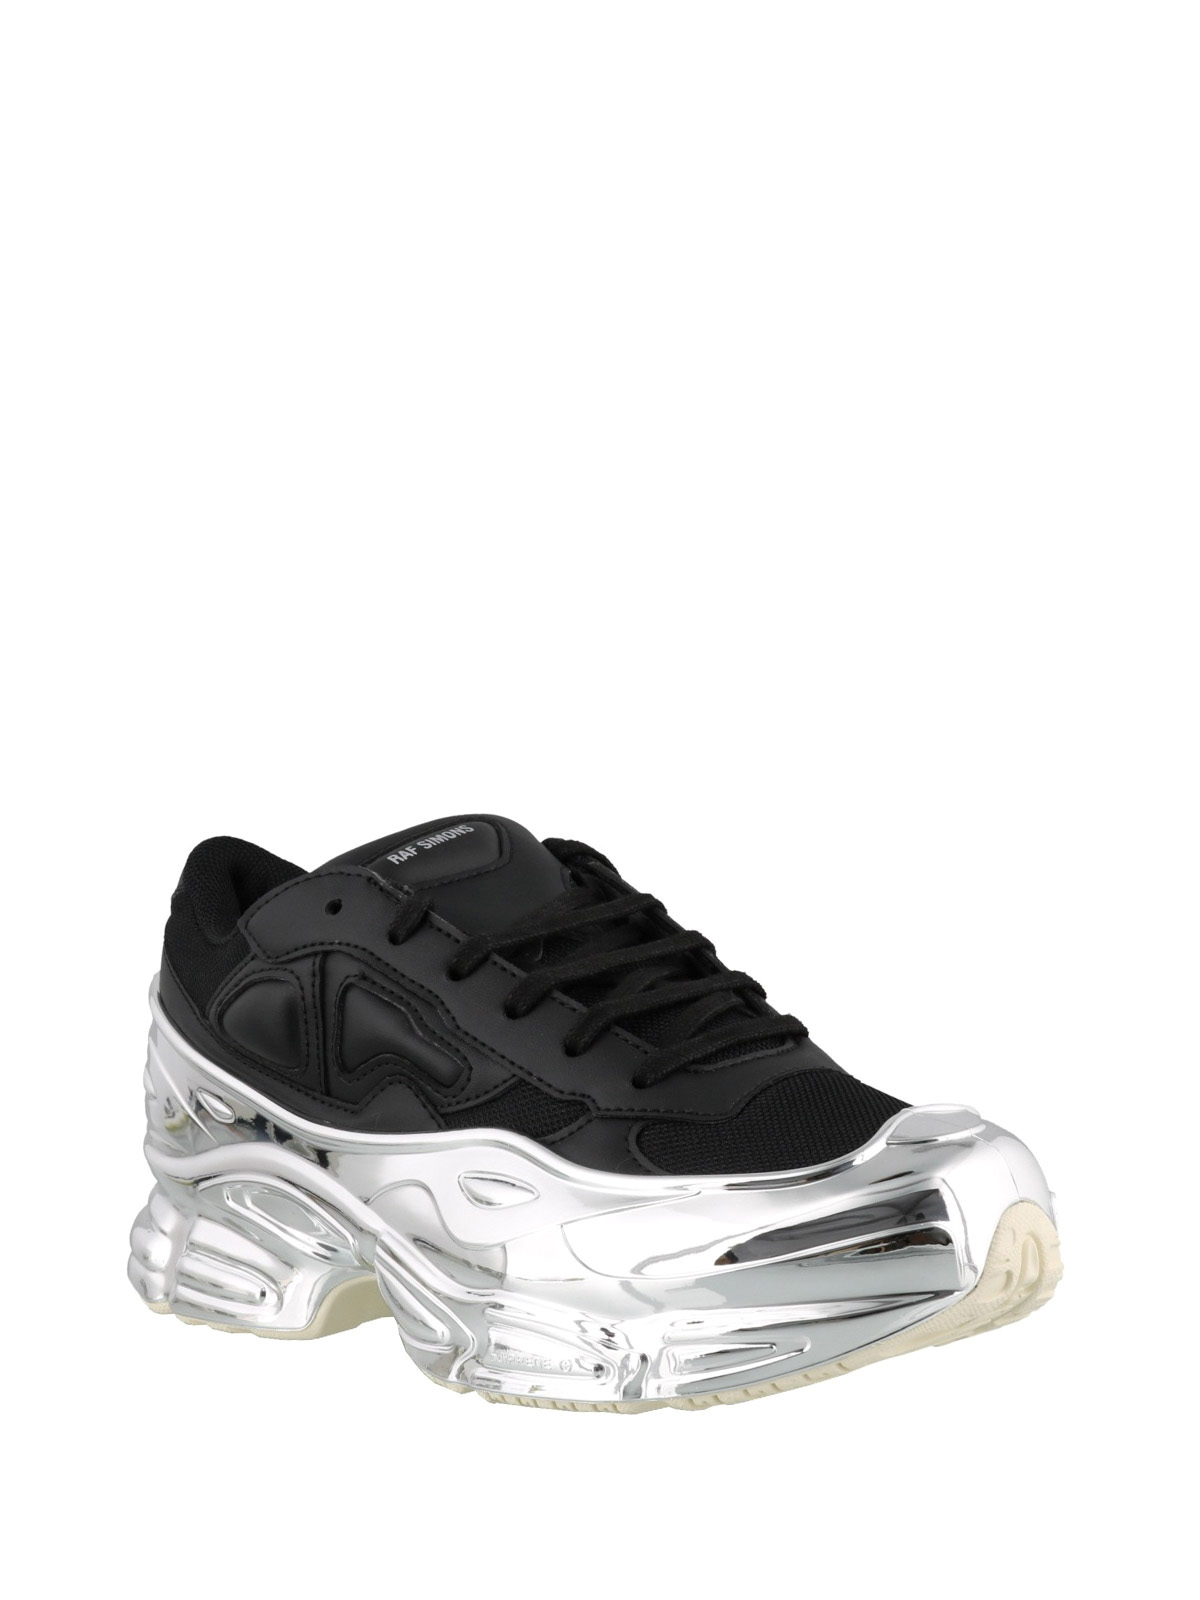 Raf Simons Adidas - Sneaker Ozweego RS nere e argento - sneakers - EE7944